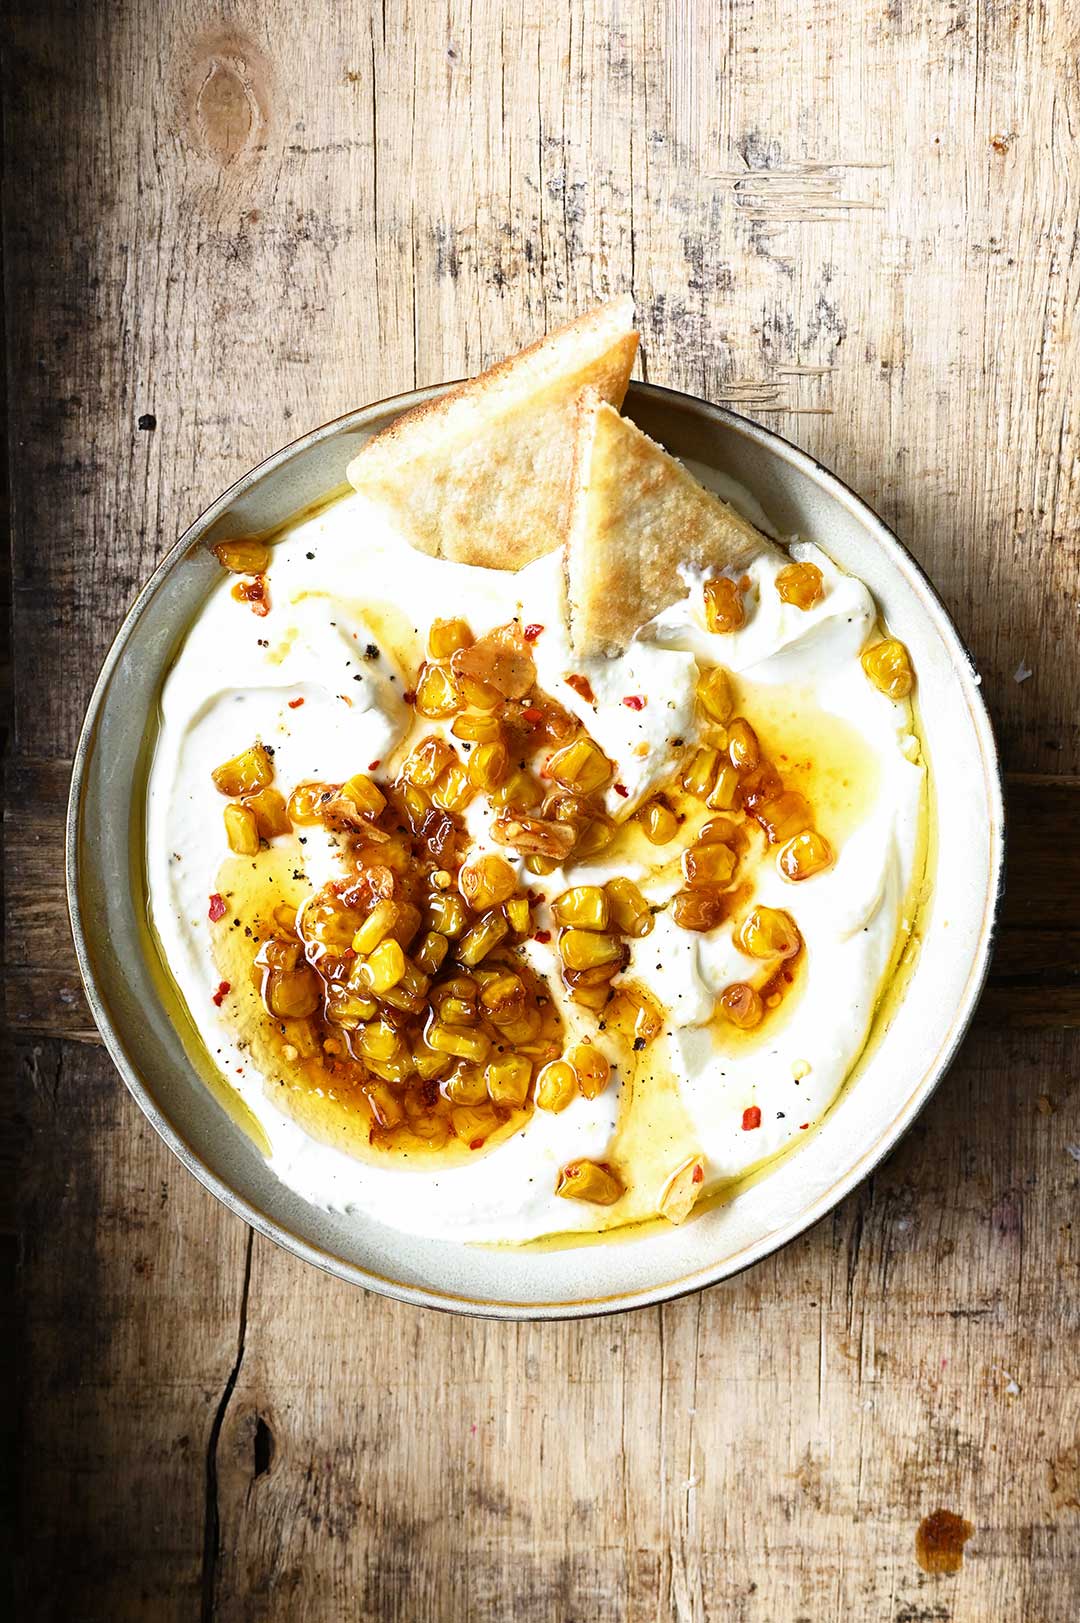 Whipped Feta Dip with Candied Corn